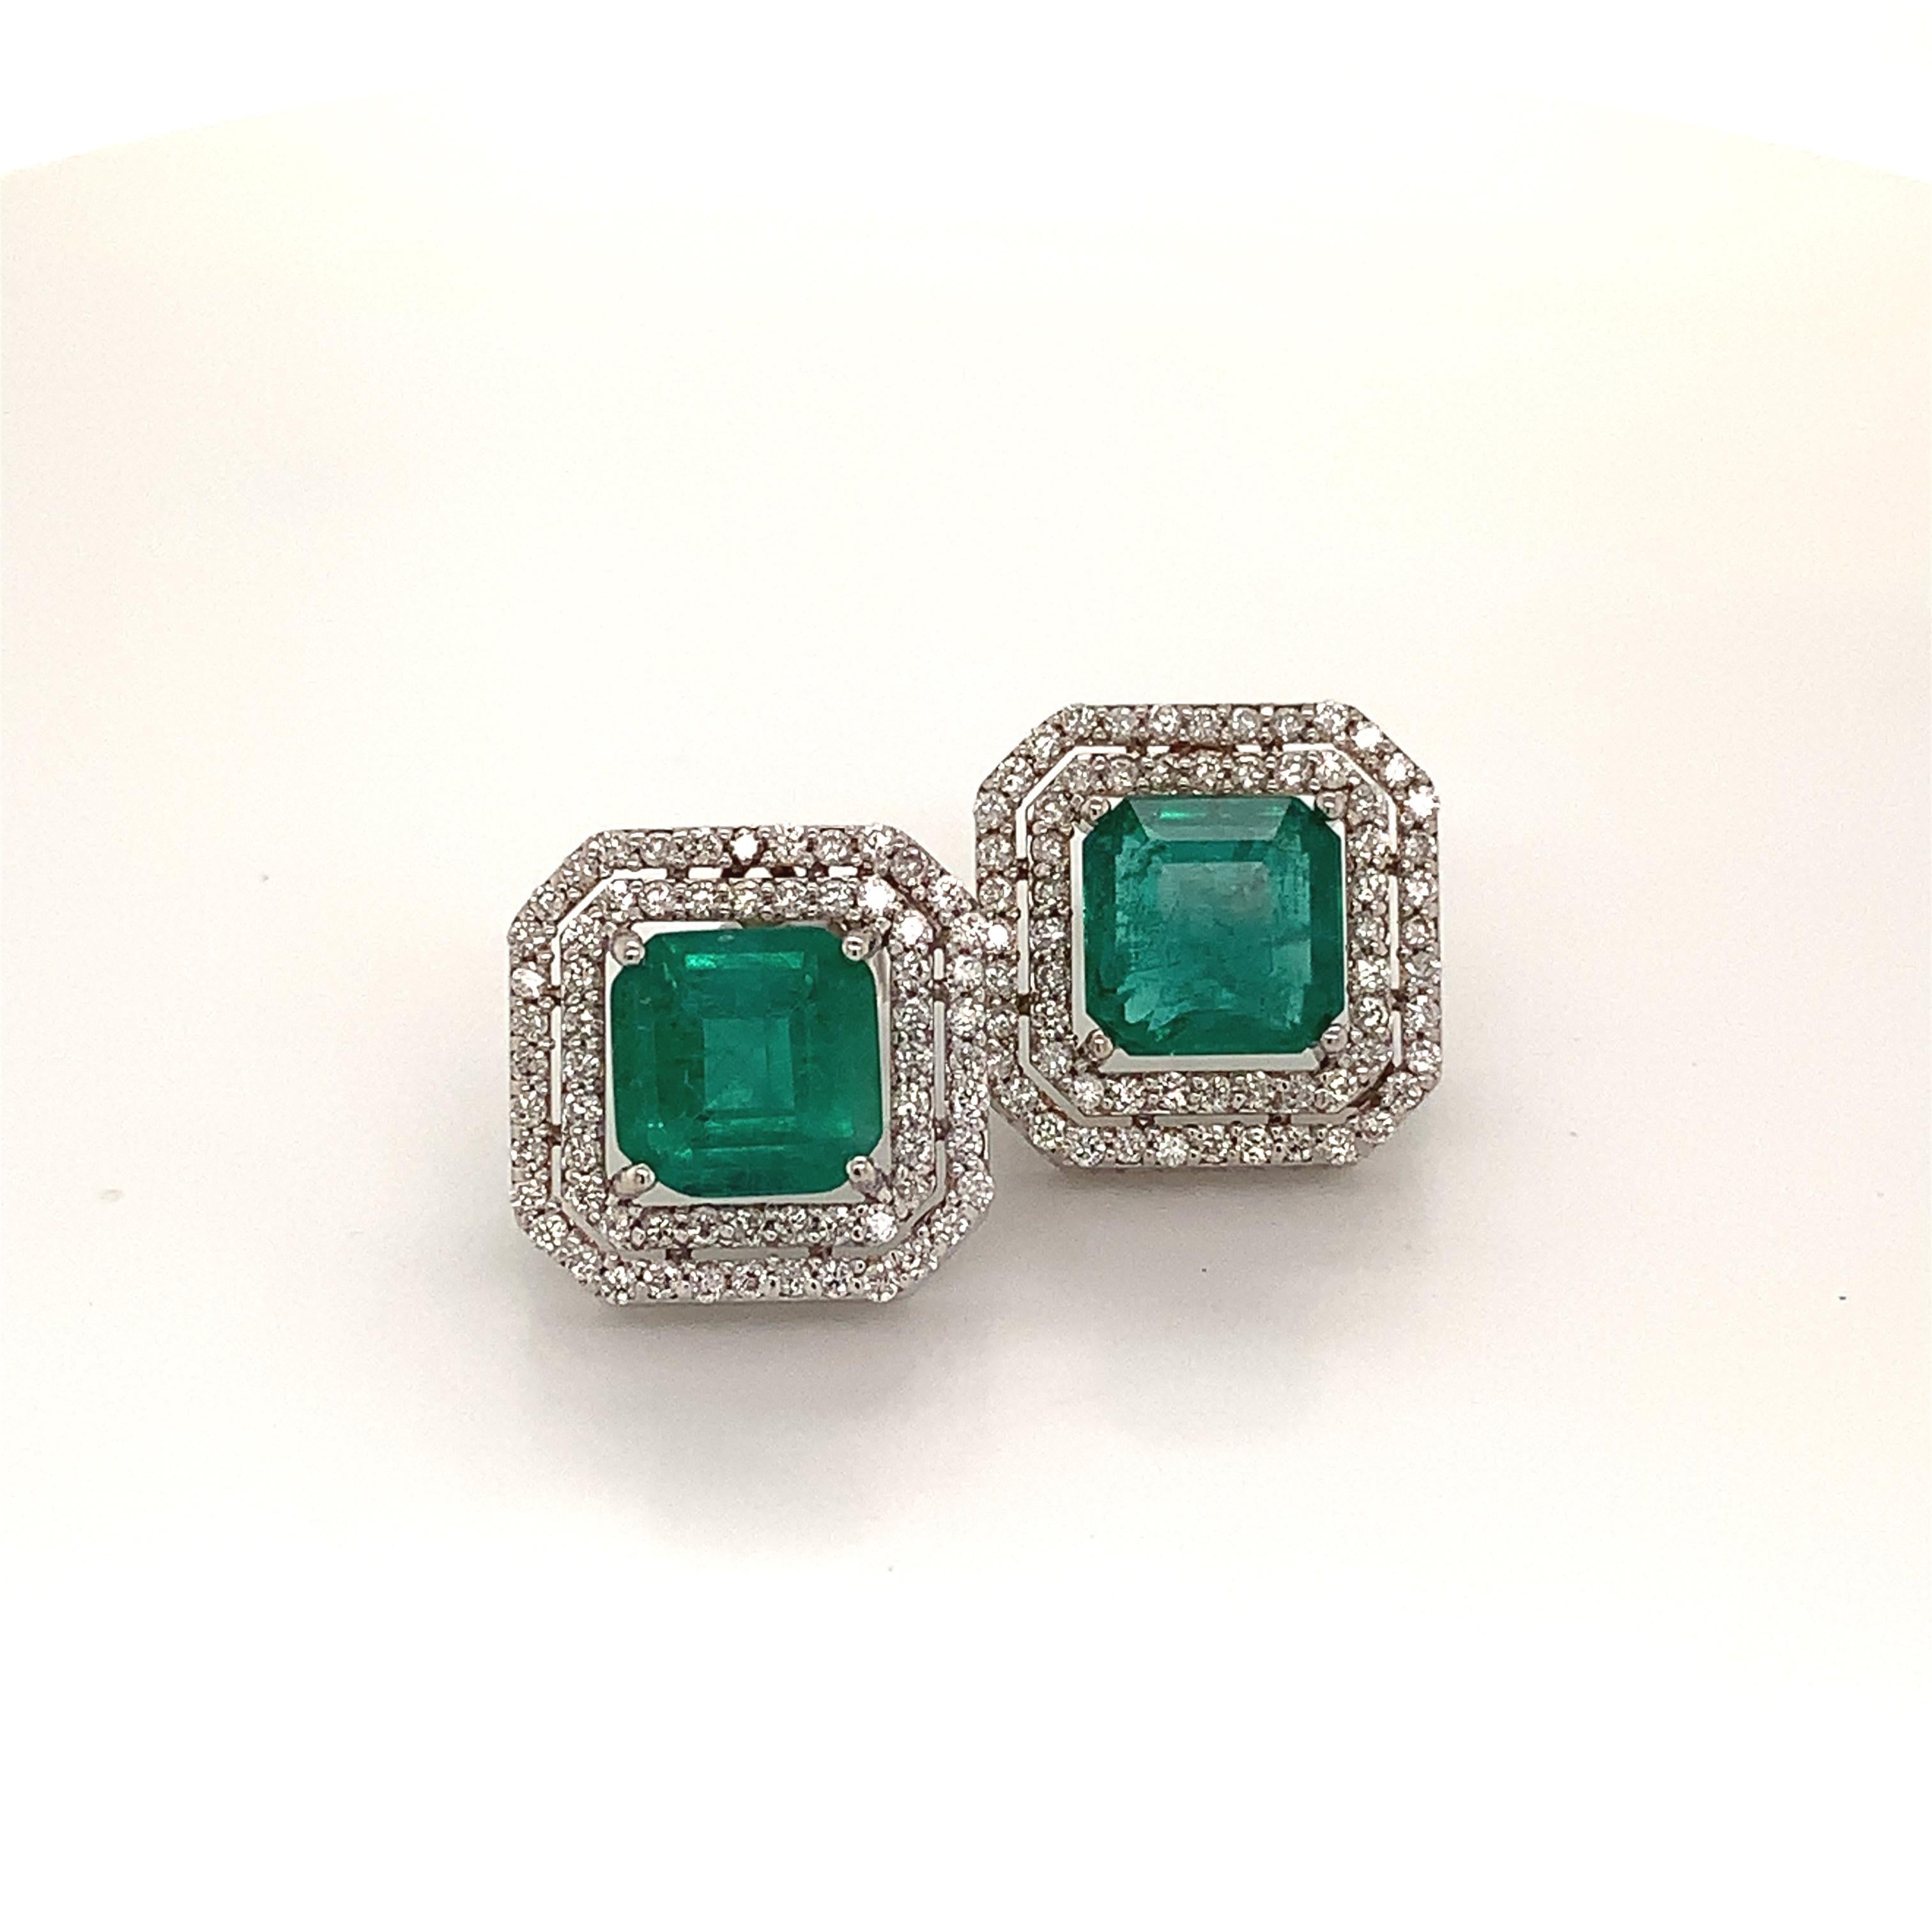 Natural Finely Faceted Quality Emerald Diamond Earrings 14k Gold 4.72 TCW Certified $8,950 113440

This is a Unique Custom Made Glamorous Piece of Jewelry!

Nothing says, 